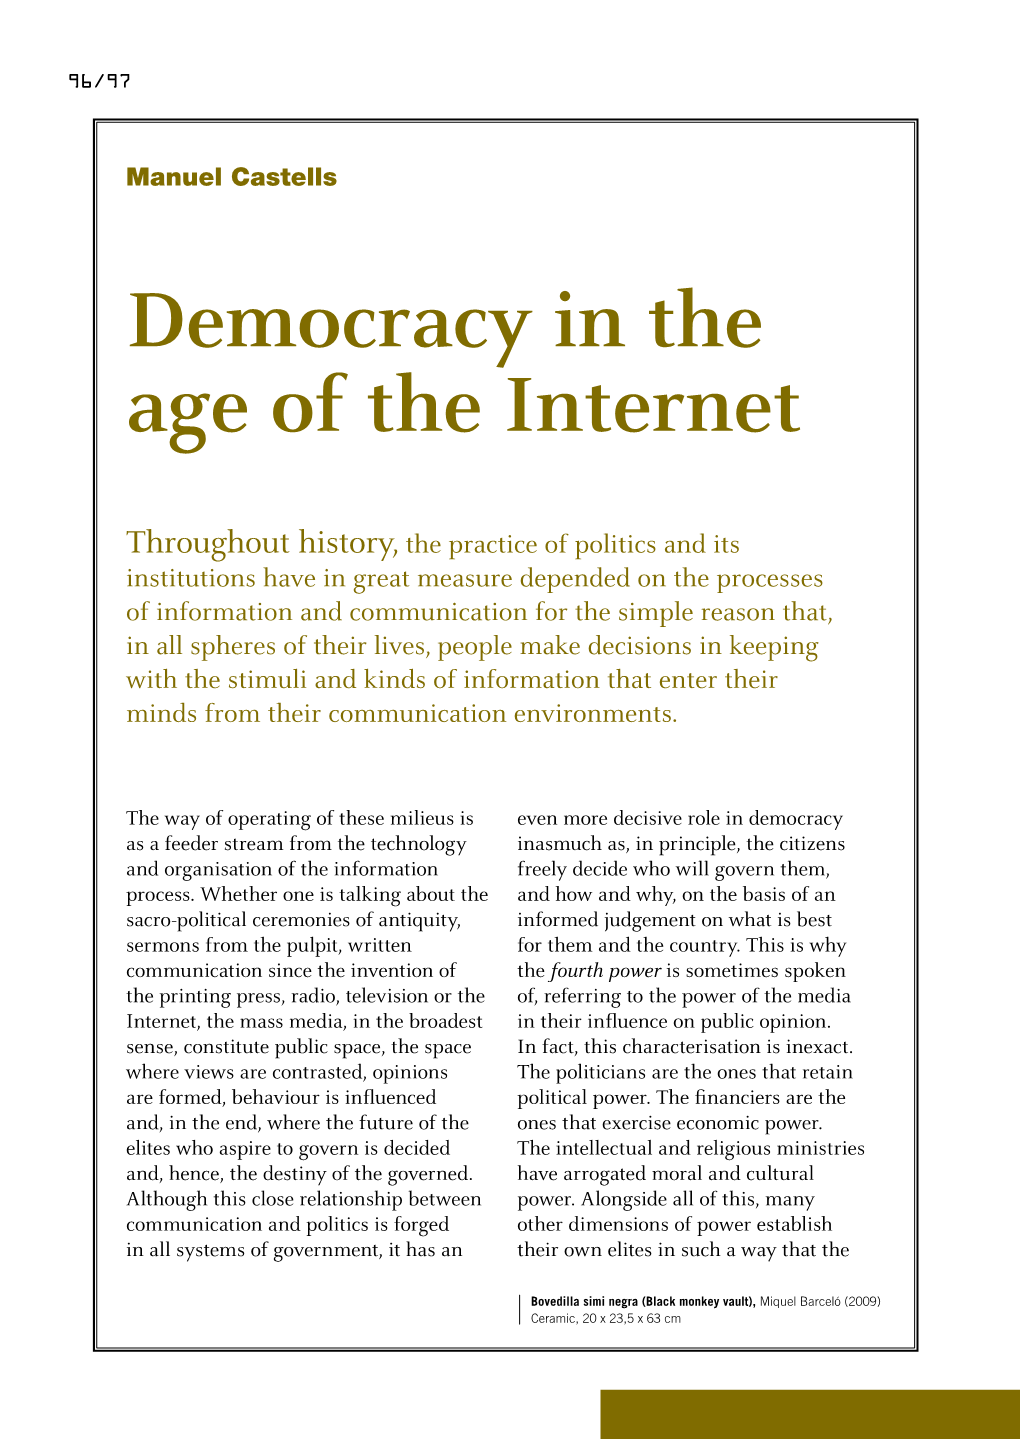 Democracy in the Age of the Internet